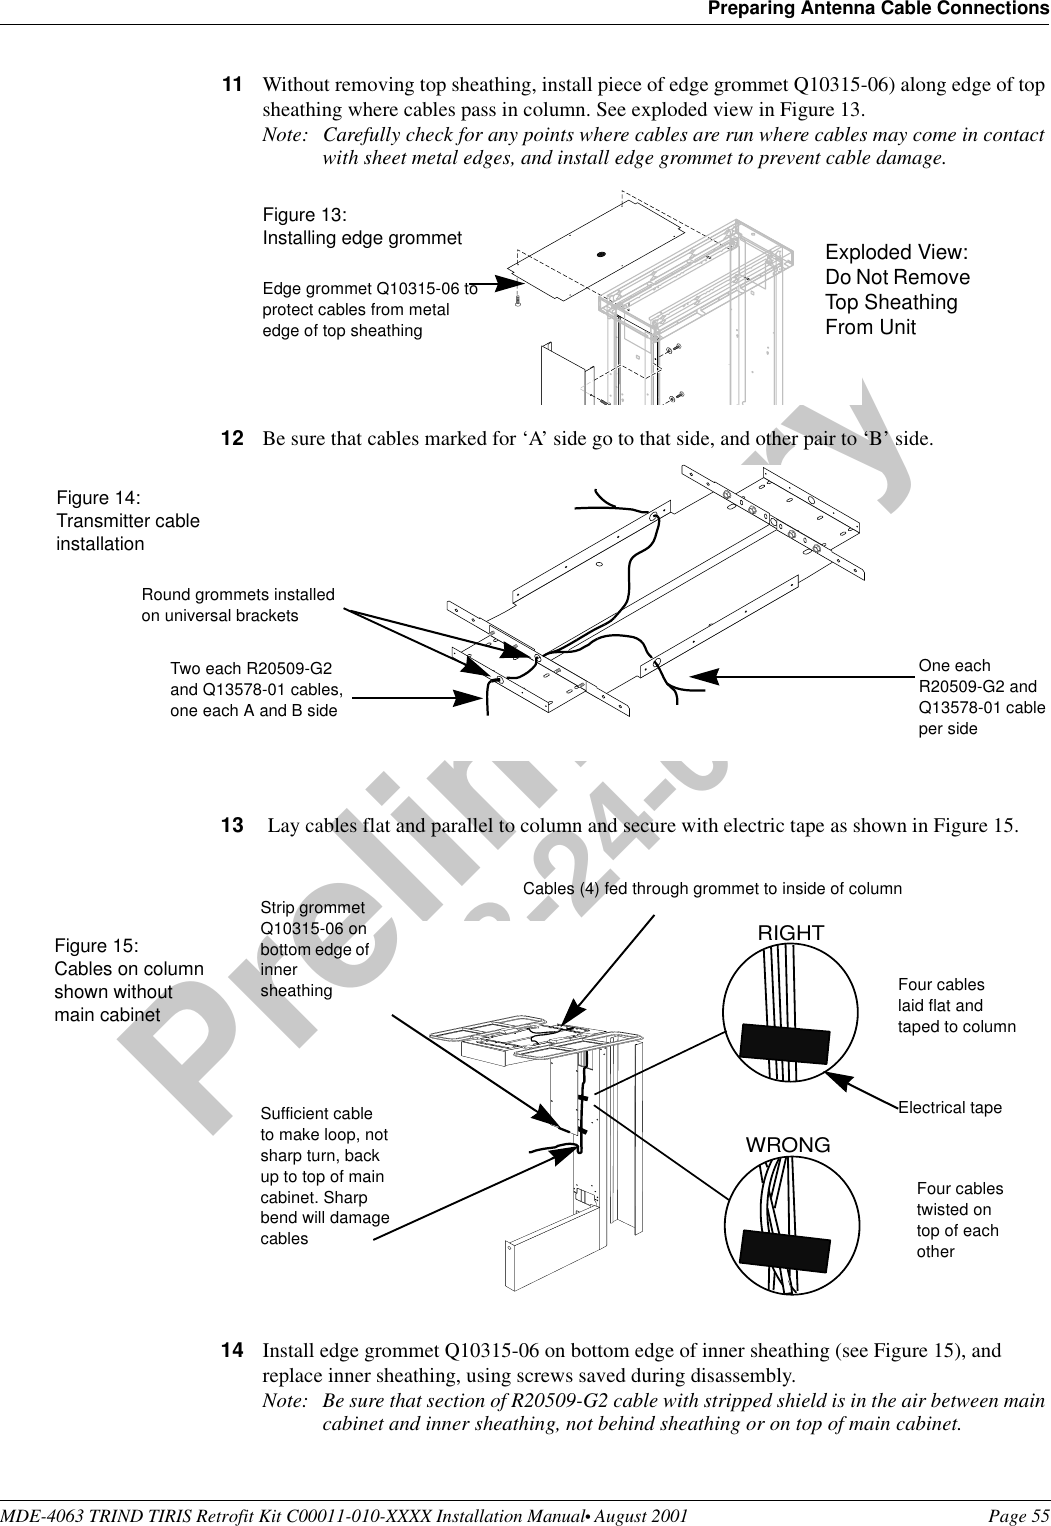 MDE-4063 TRIND TIRIS Retrofit Kit C00011-010-XXXX Installation Manual• August 2001 Page 55Preparing Antenna Cable ConnectionsPreliminary08-24-0111 Without removing top sheathing, install piece of edge grommet Q10315-06) along edge of top sheathing where cables pass in column. See exploded view in Figure 13.Note: Carefully check for any points where cables are run where cables may come in contact with sheet metal edges, and install edge grommet to prevent cable damage. 12 Be sure that cables marked for ‘A’ side go to that side, and other pair to ‘B’ side.13  Lay cables flat and parallel to column and secure with electric tape as shown in Figure 15.14 Install edge grommet Q10315-06 on bottom edge of inner sheathing (see Figure 15), and replace inner sheathing, using screws saved during disassembly.Note: Be sure that section of R20509-G2 cable with stripped shield is in the air between main cabinet and inner sheathing, not behind sheathing or on top of main cabinet.Edge grommet Q10315-06 to protect cables from metal edge of top sheathingFigure 13:Installing edge grommet Exploded View: Do Not Remove Top Sheathing From UnitRound grommets installed on universal bracketsTwo each R20509-G2 and Q13578-01 cables, one each A and B sideFigure 14: Transmitter cableinstallationOne each R20509-G2 and Q13578-01 cable per sideRIGHTWRONGFour cables laid flat and taped to columnFour cables twisted on top of each otherSufficient cable to make loop, not sharp turn, back up to top of main cabinet. Sharp bend will damage cablesCables (4) fed through grommet to inside of columnElectrical tapeStrip grommet Q10315-06 on bottom edge of inner sheathingFigure 15: Cables on column shown without main cabinet